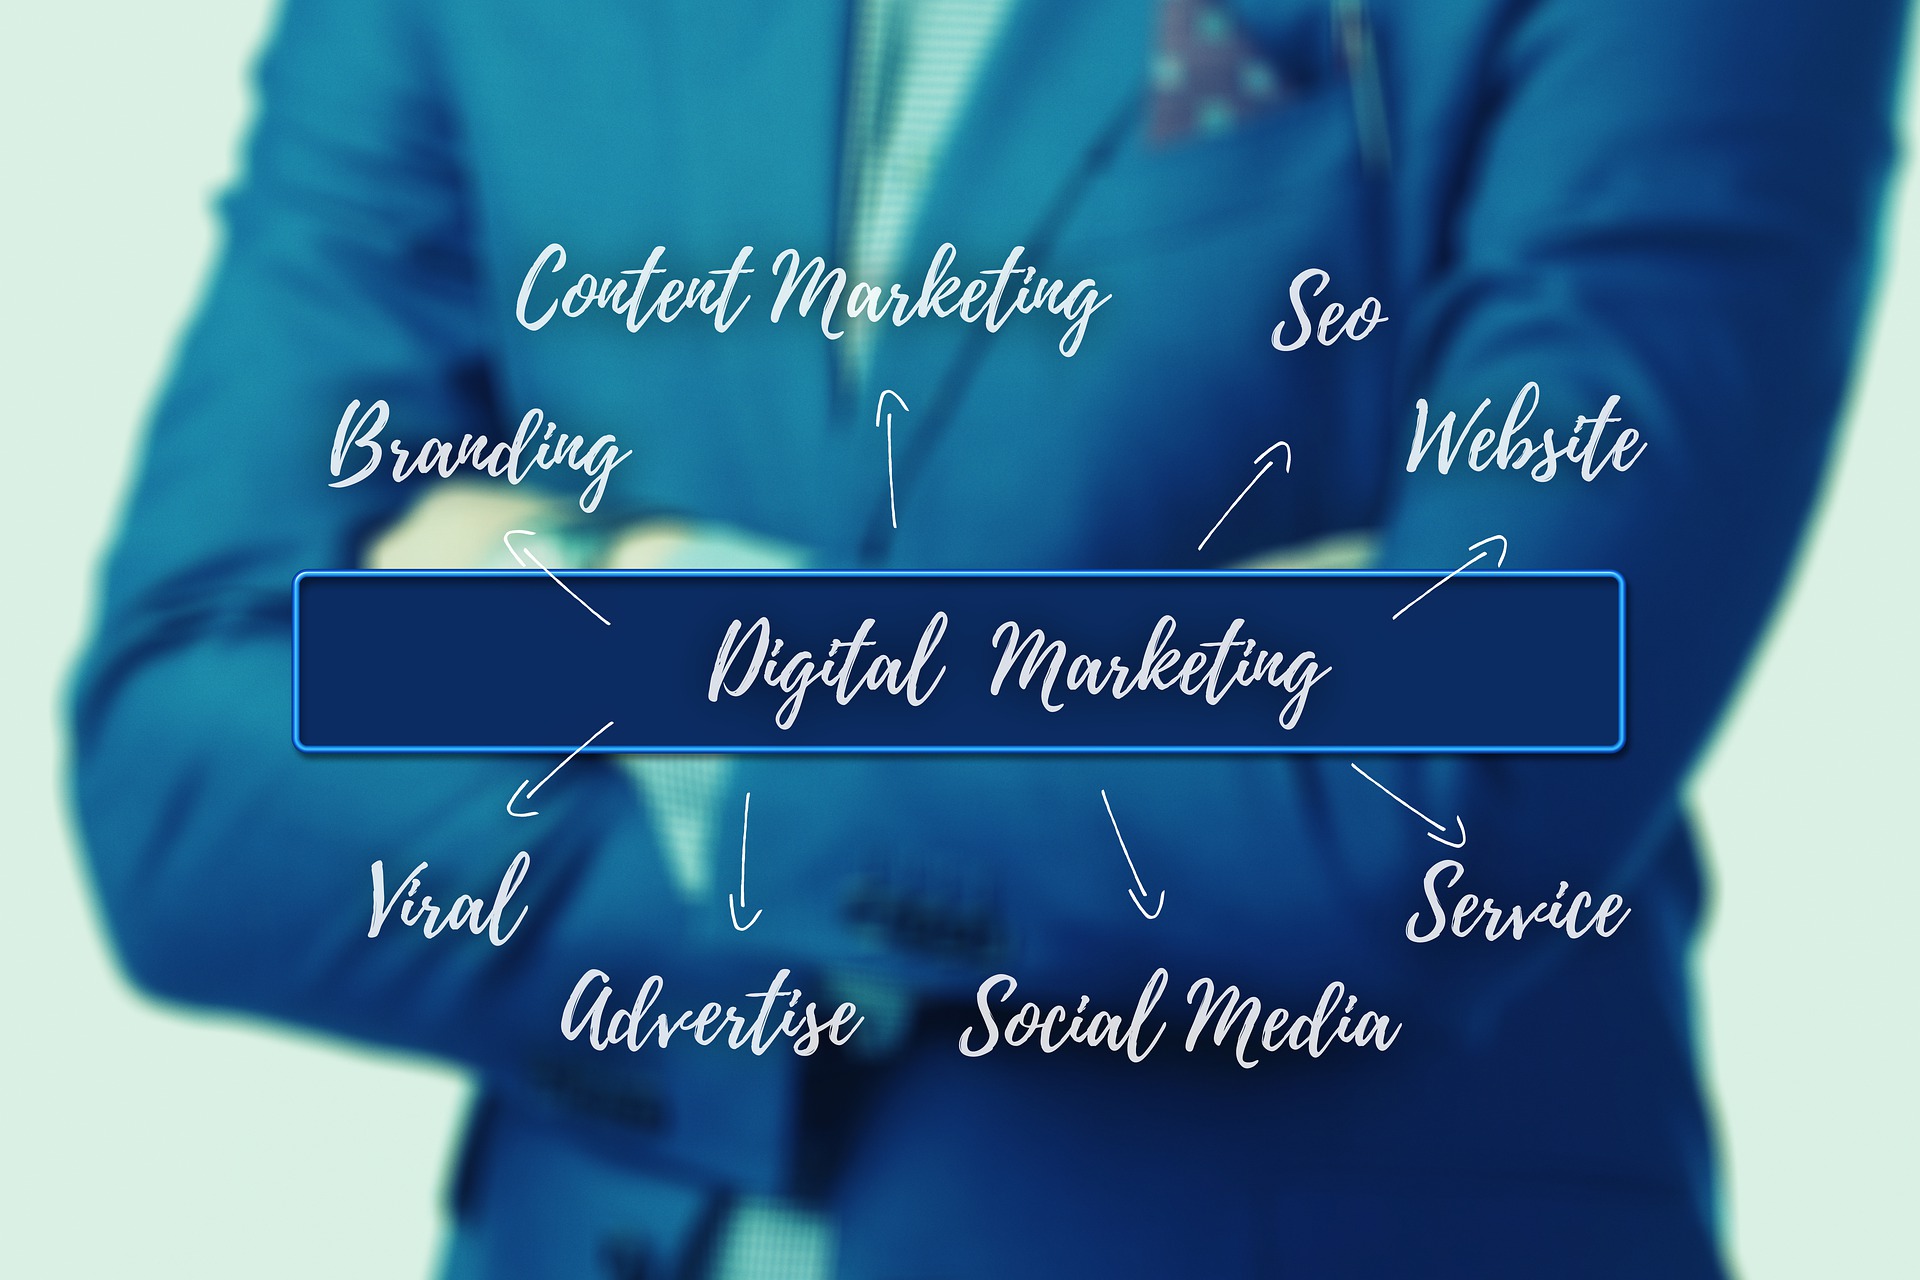 Digital marketing covers several areas including content marketing, seo, branding, social media and advertising